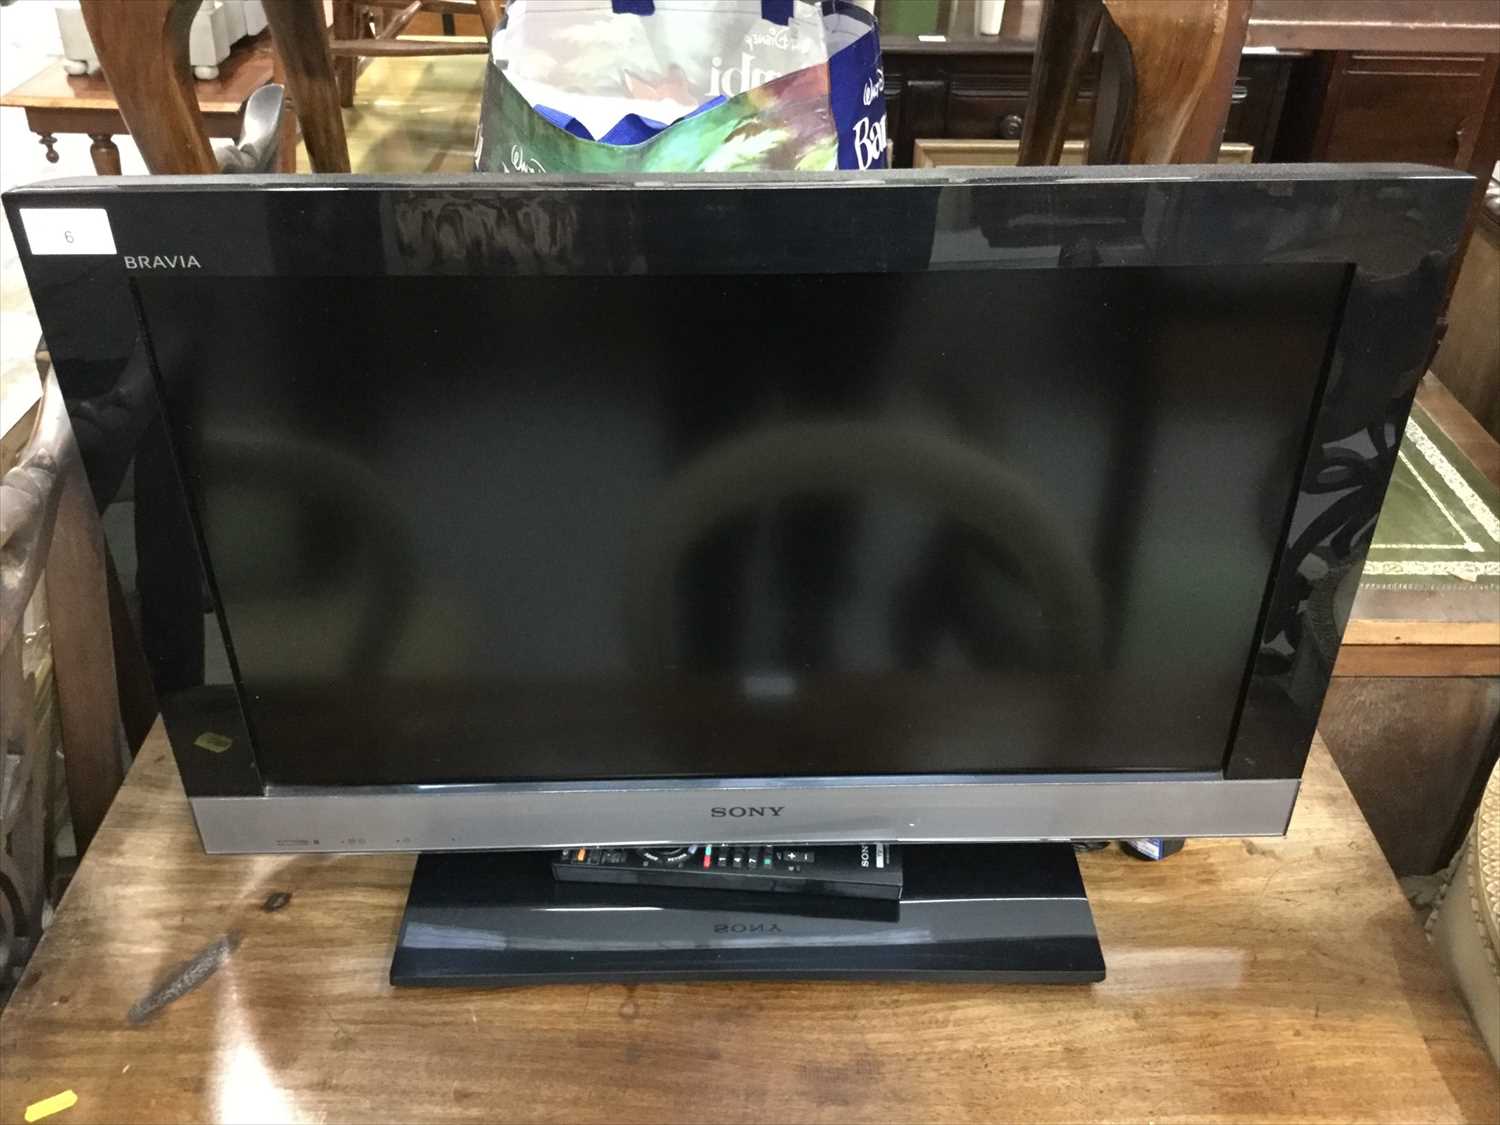 Lot 6 - Sony Bravia 26" LCD Television, model no. KDL- 26EX302, together with remote control